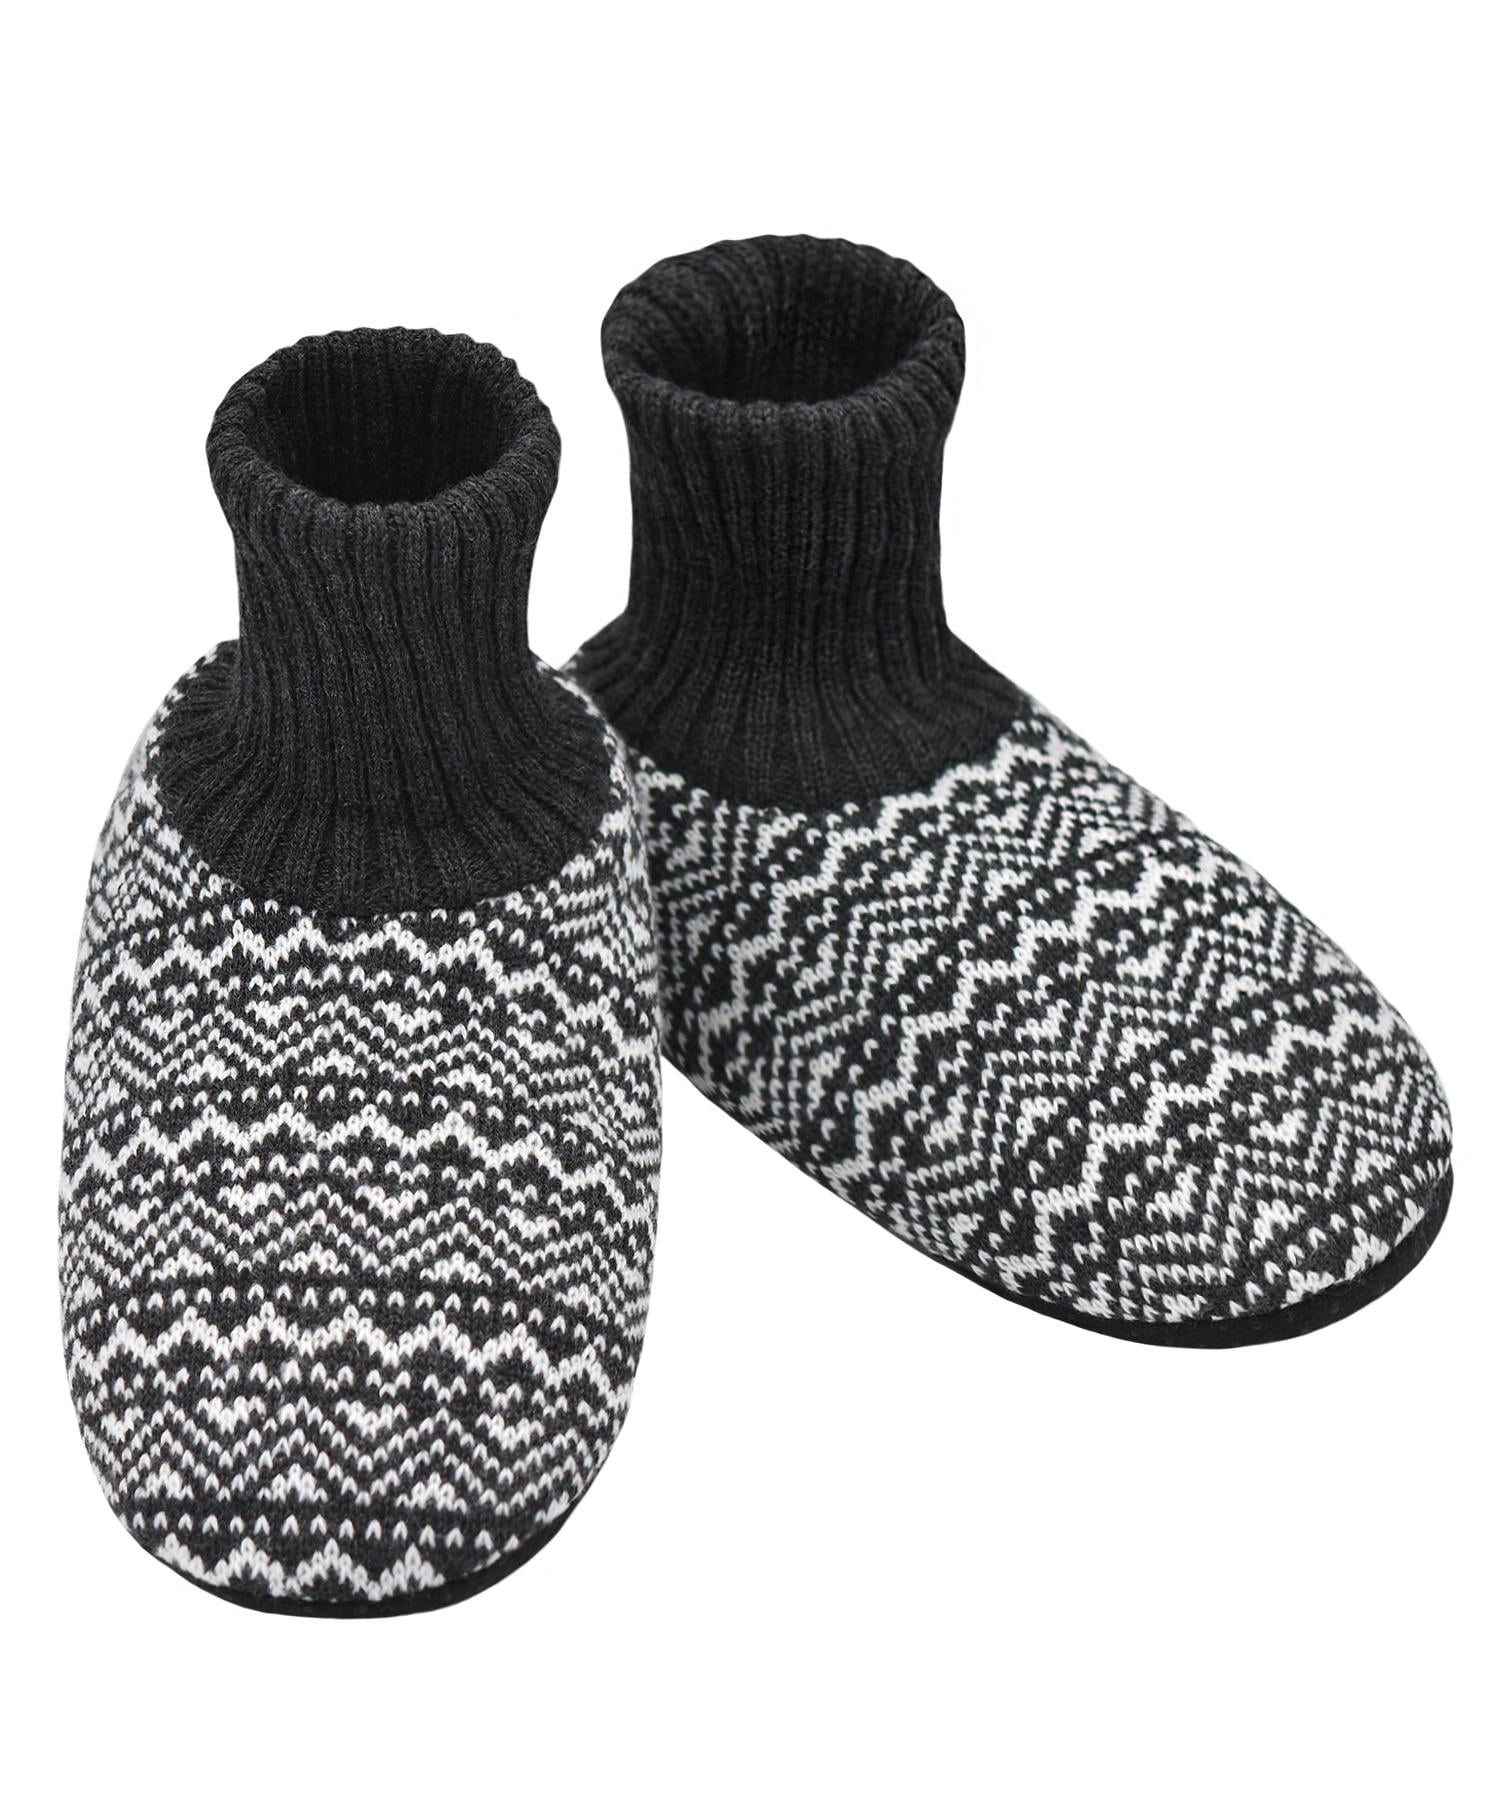 Panda Bros Slipper Socks for Women Cozy Warm Lined Fuzzy Sock Slippers Indoor Booties with Non Slip Grippers 